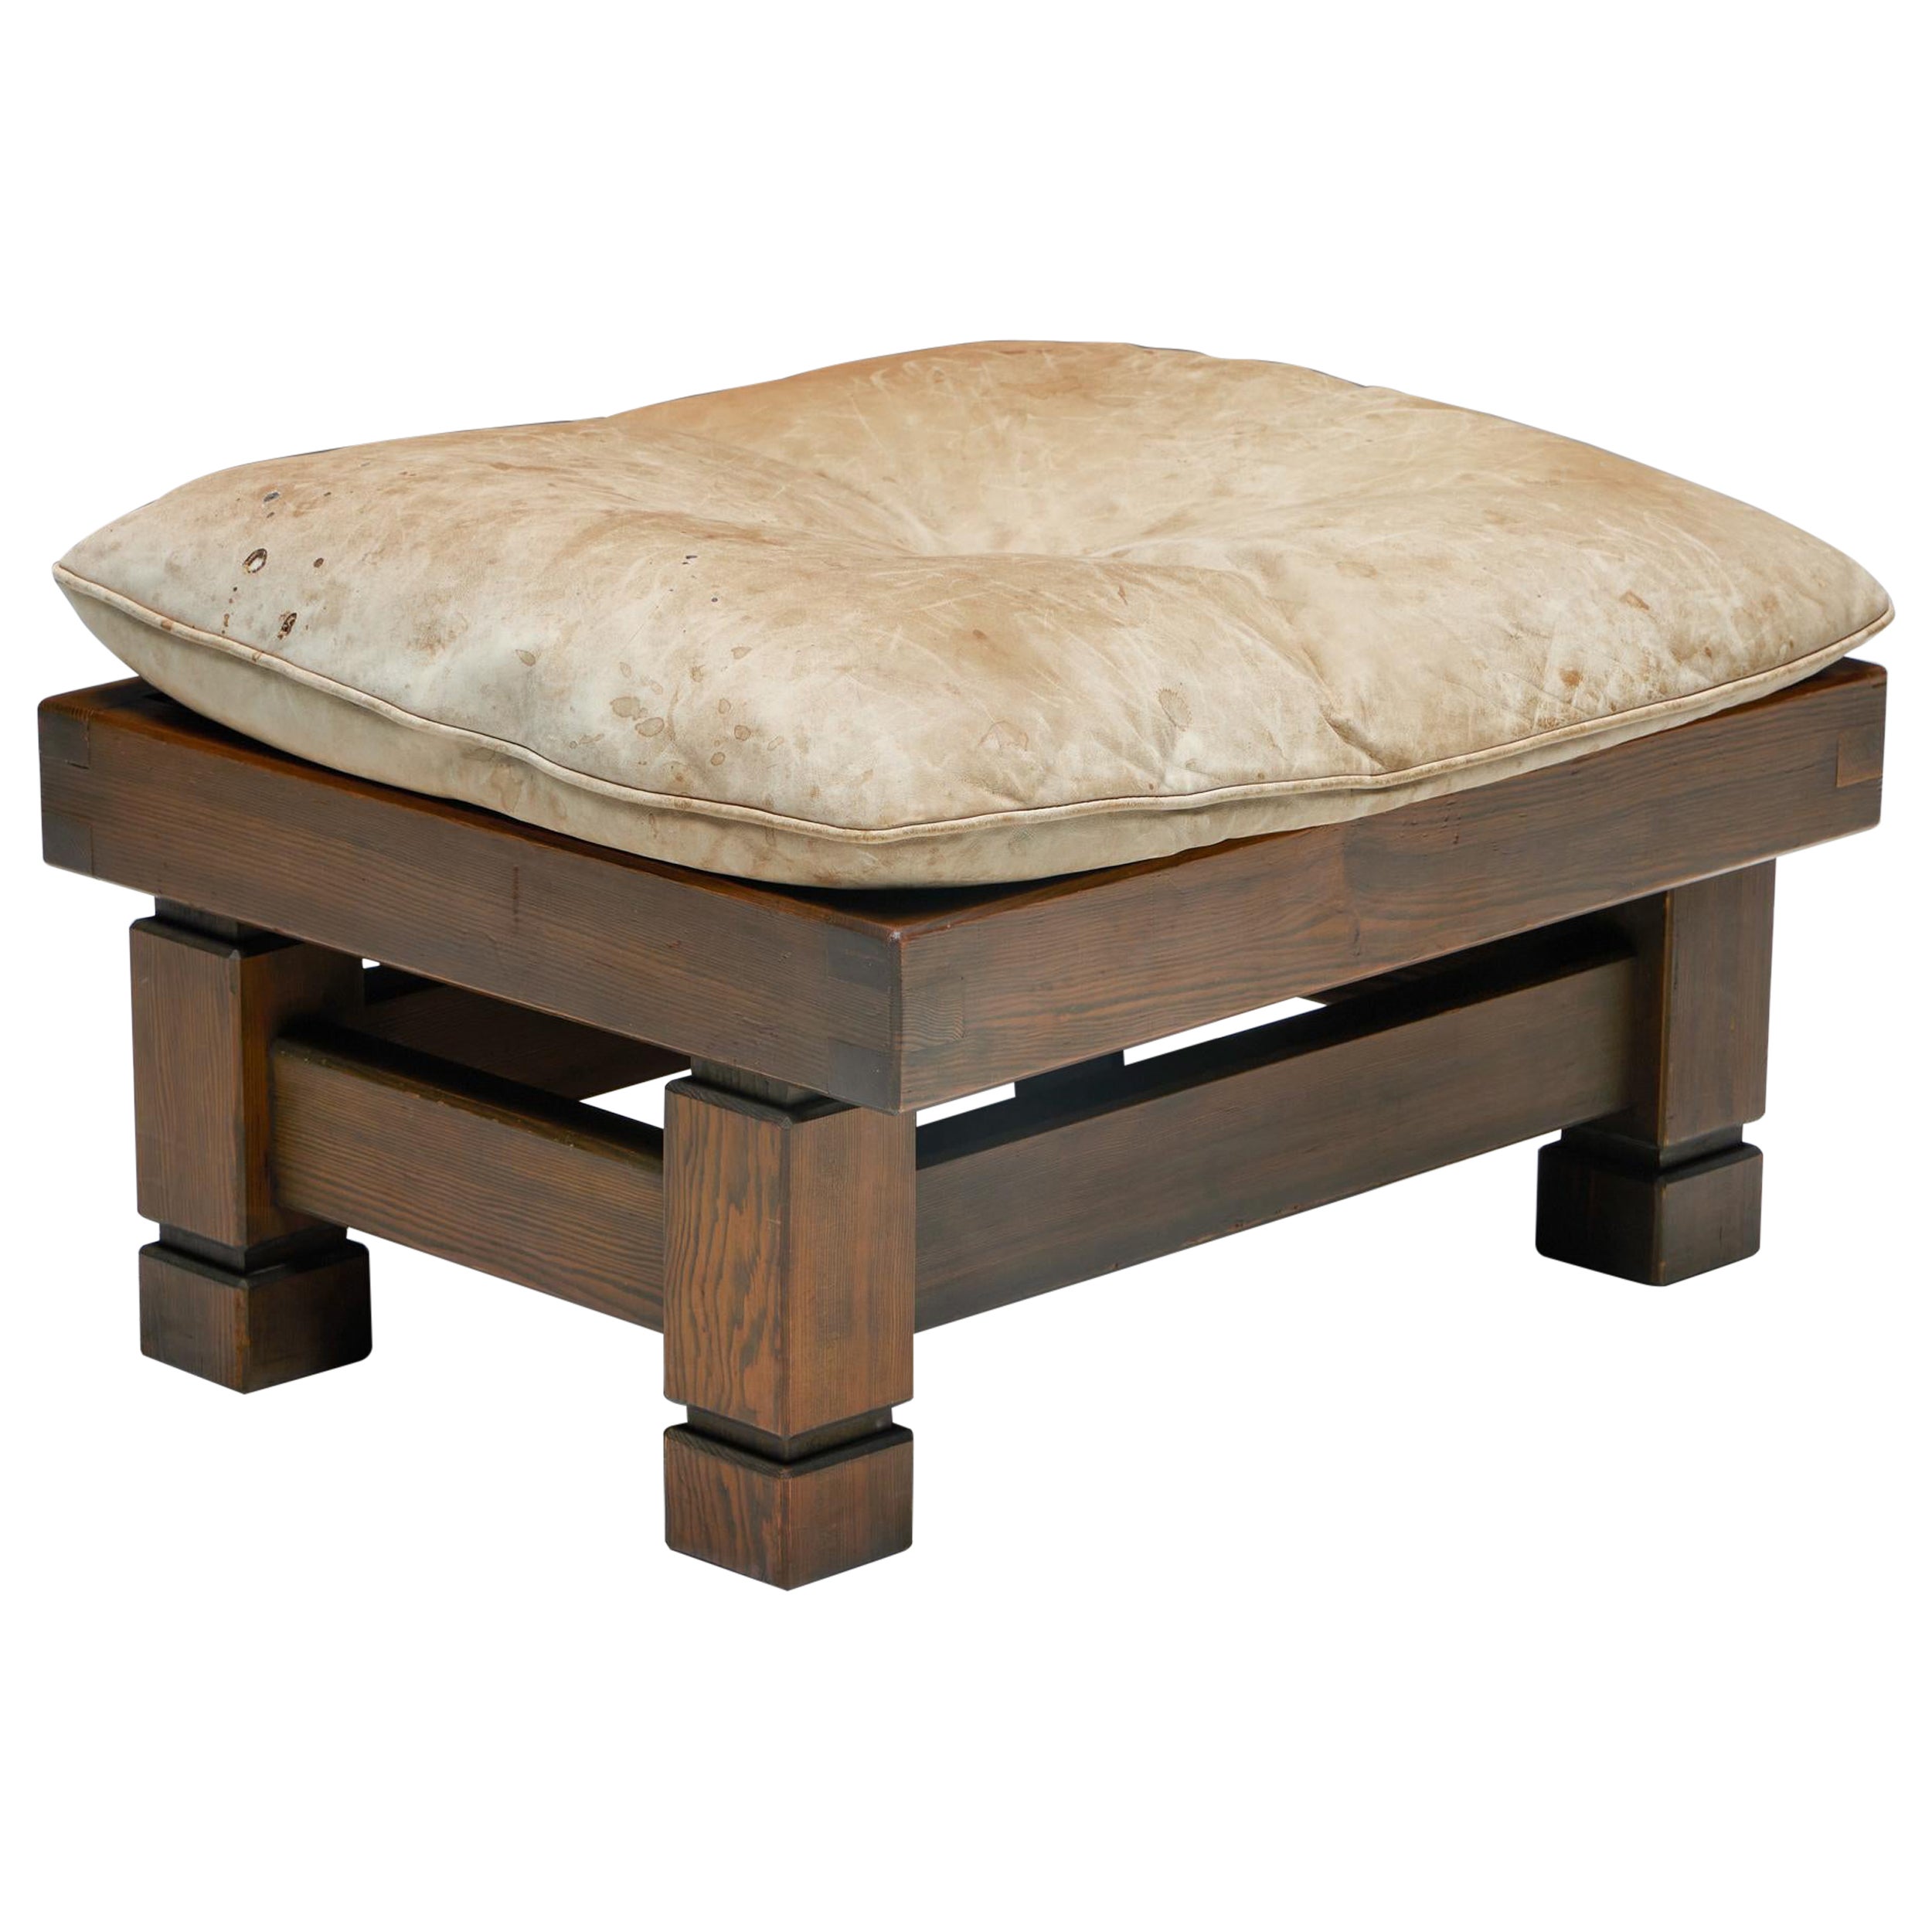 French Wooden Footstool with Leather Cushion, 1960s